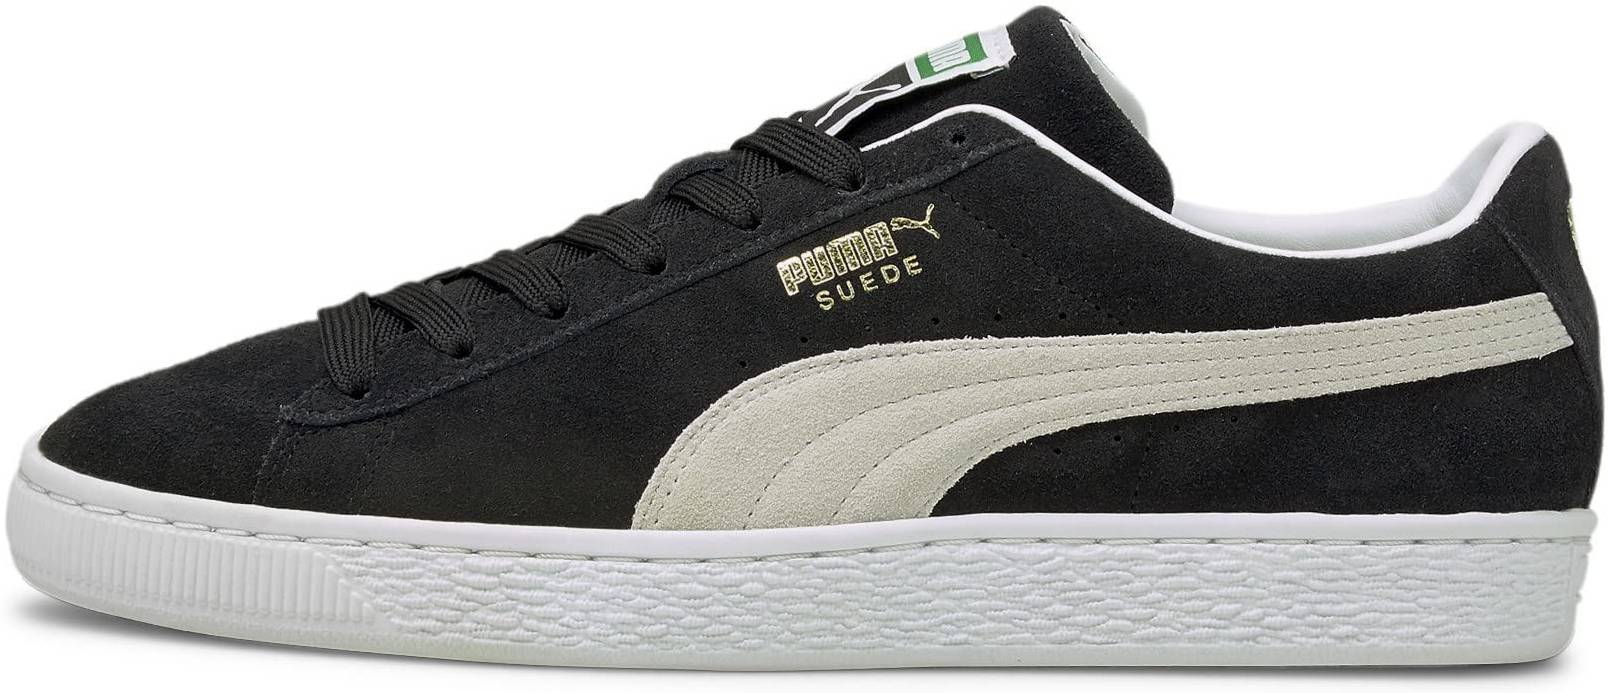 september inspanning Besmetten PUMA Suede Classic Review, Facts, Comparison | RunRepeat